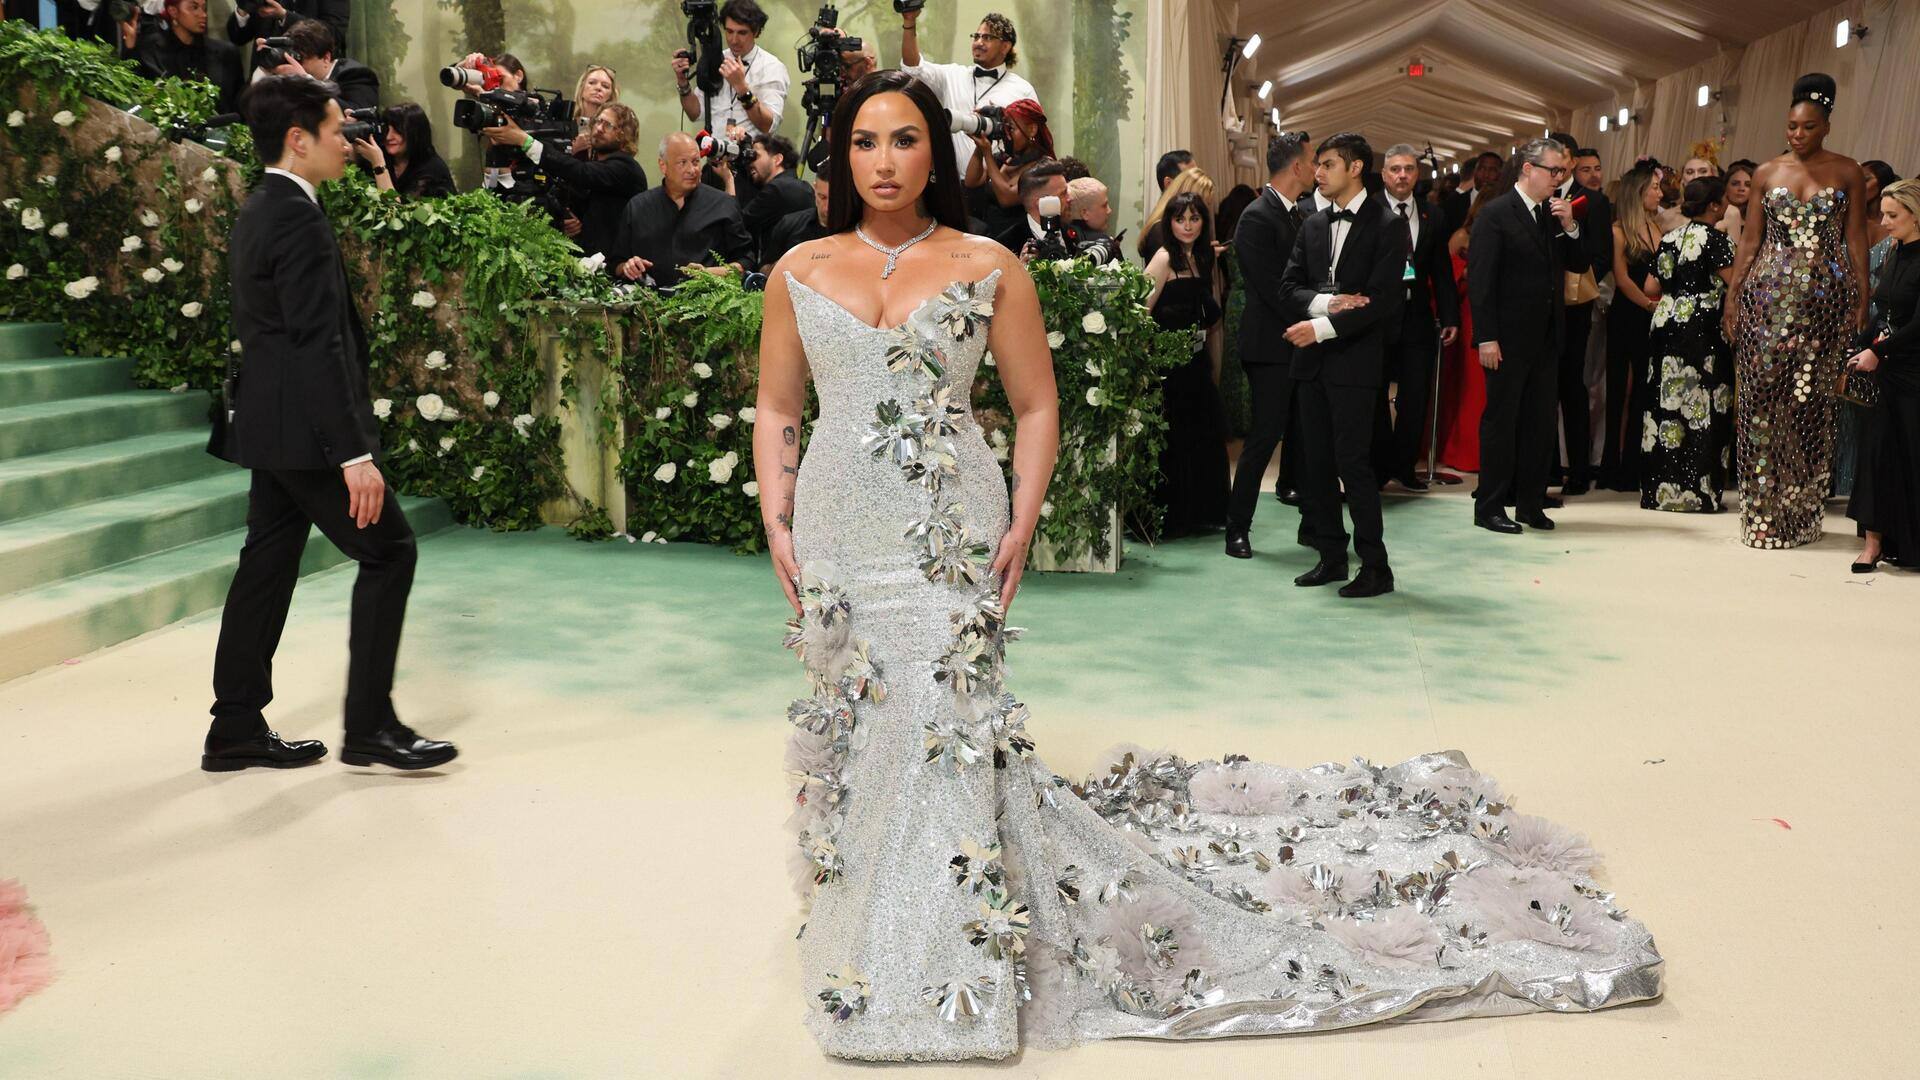 Years after calling Met Gala 'fake,' 'uncomfortable,' Demi Lovato returns  